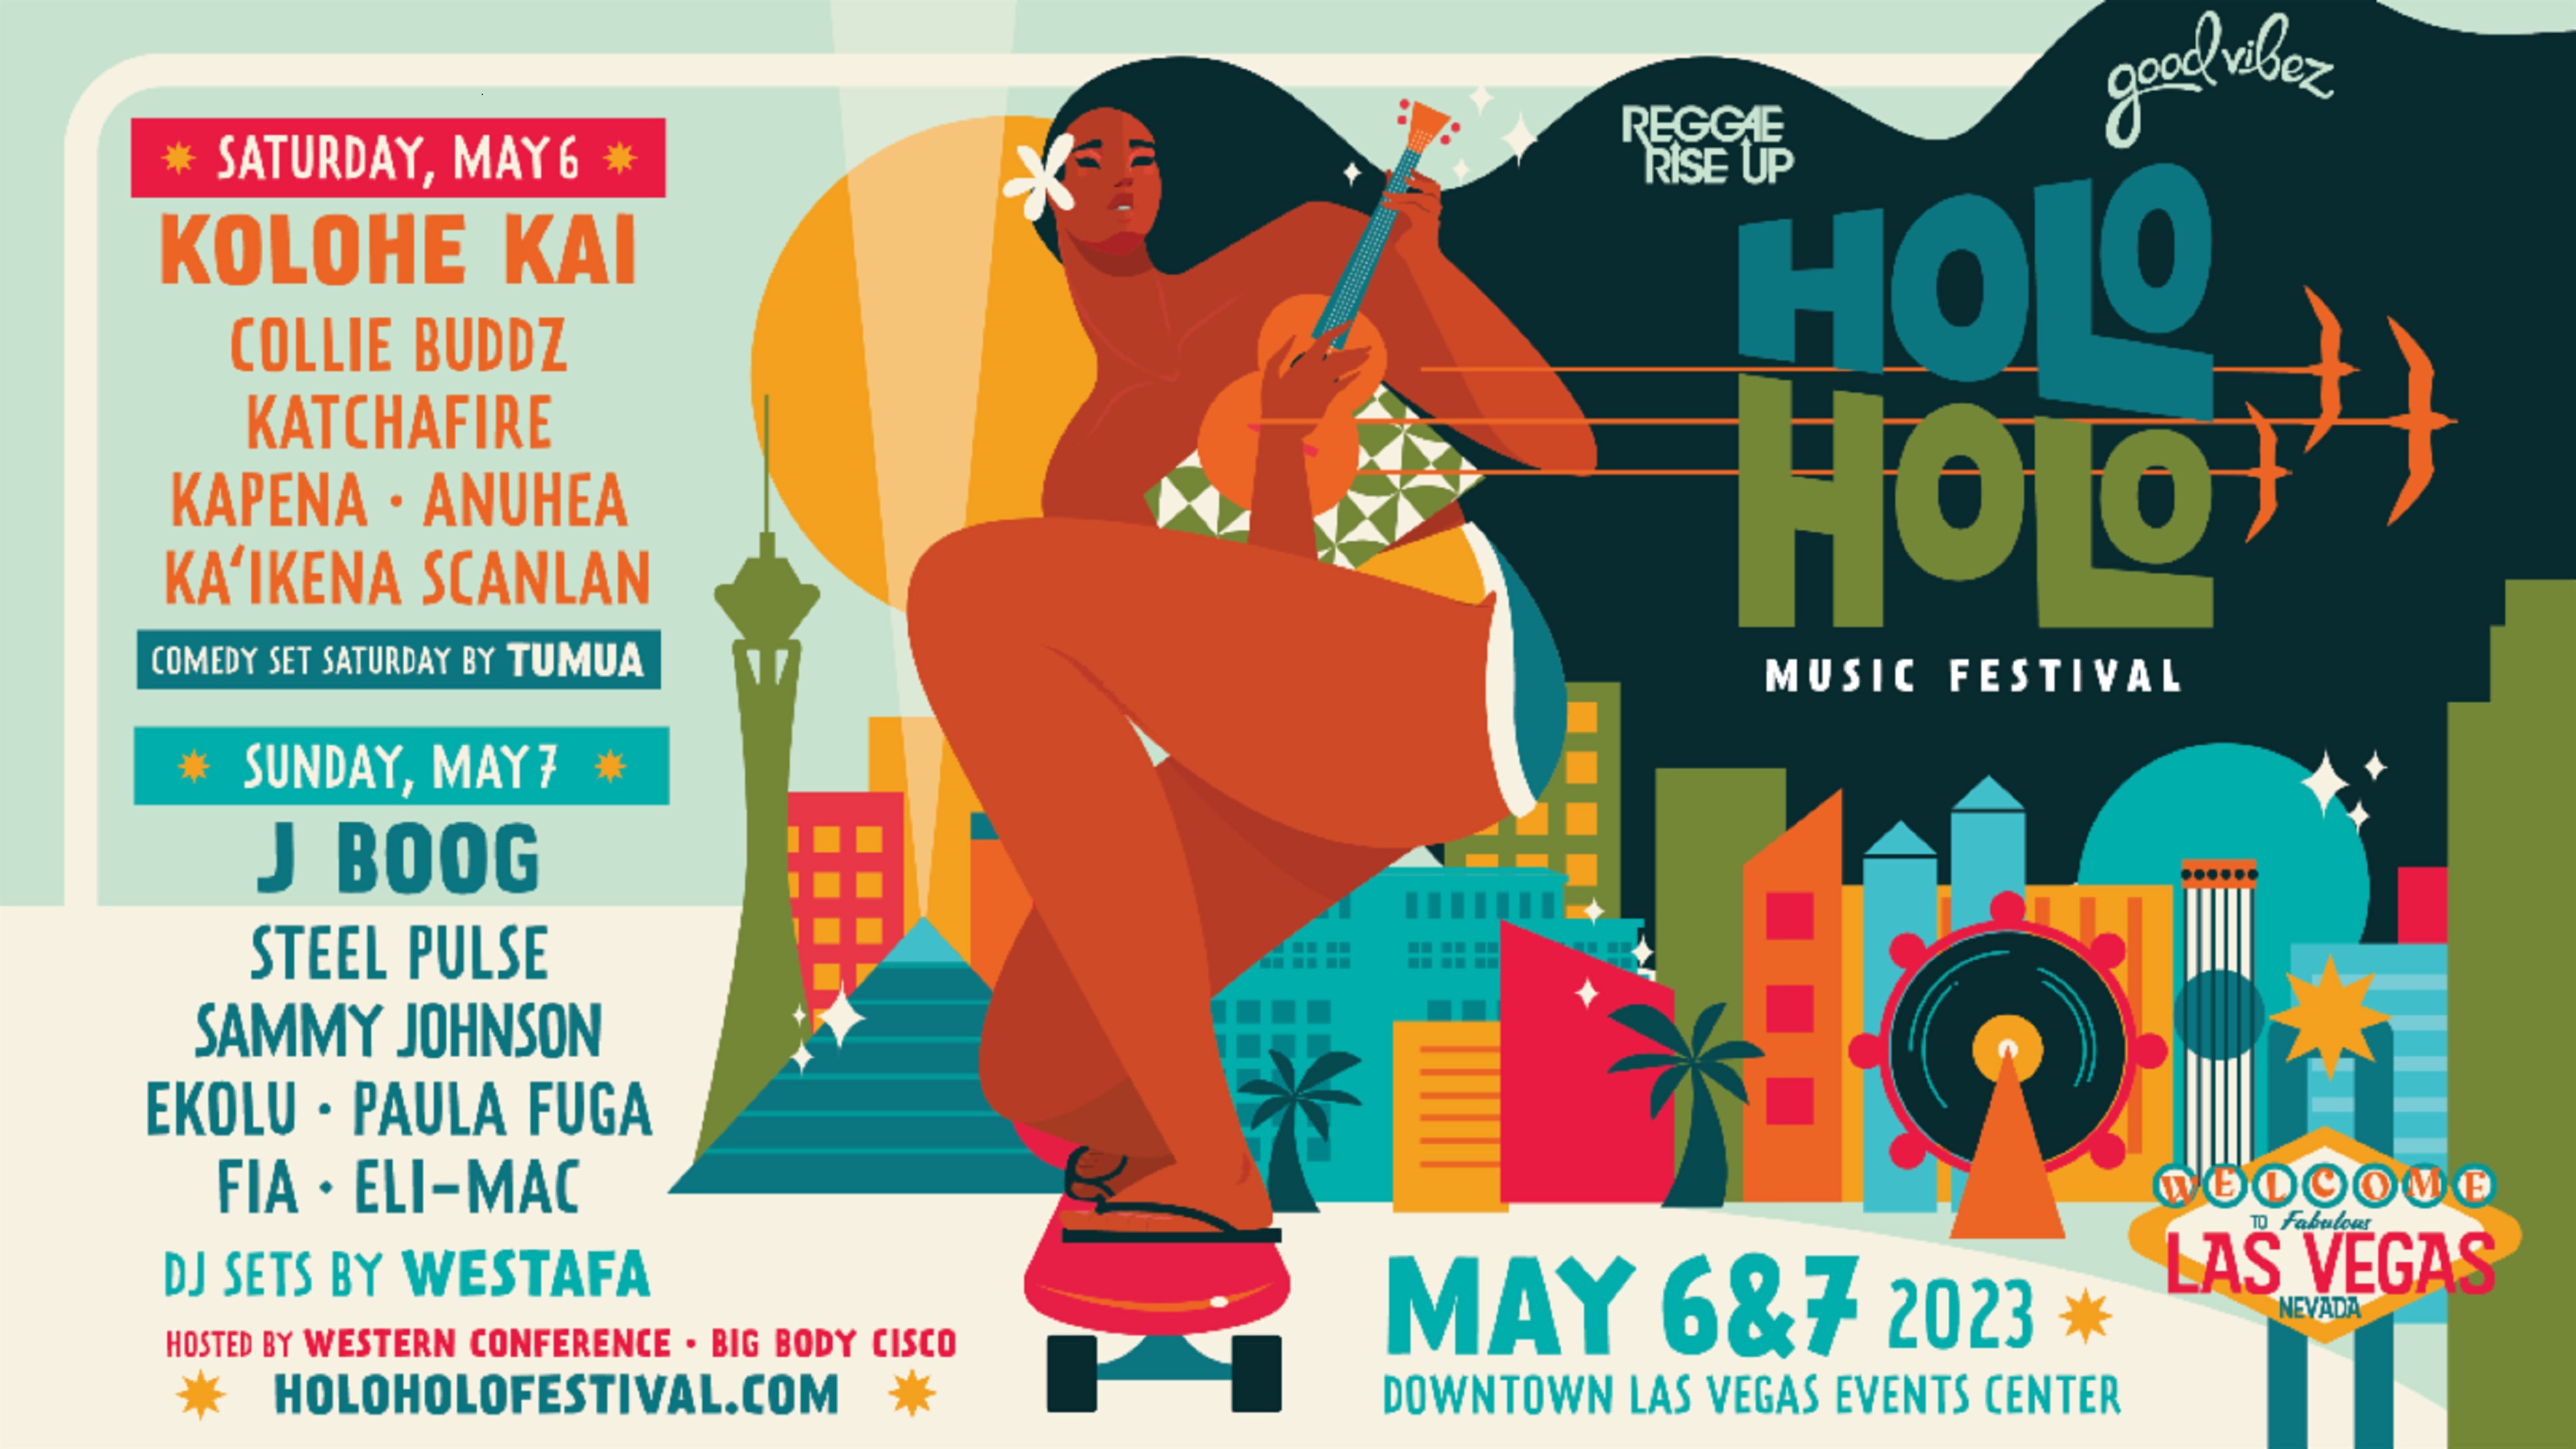 Holo Holo Music Festival Announces Lineup and Moves to Las Vegas May 6-7, 2023